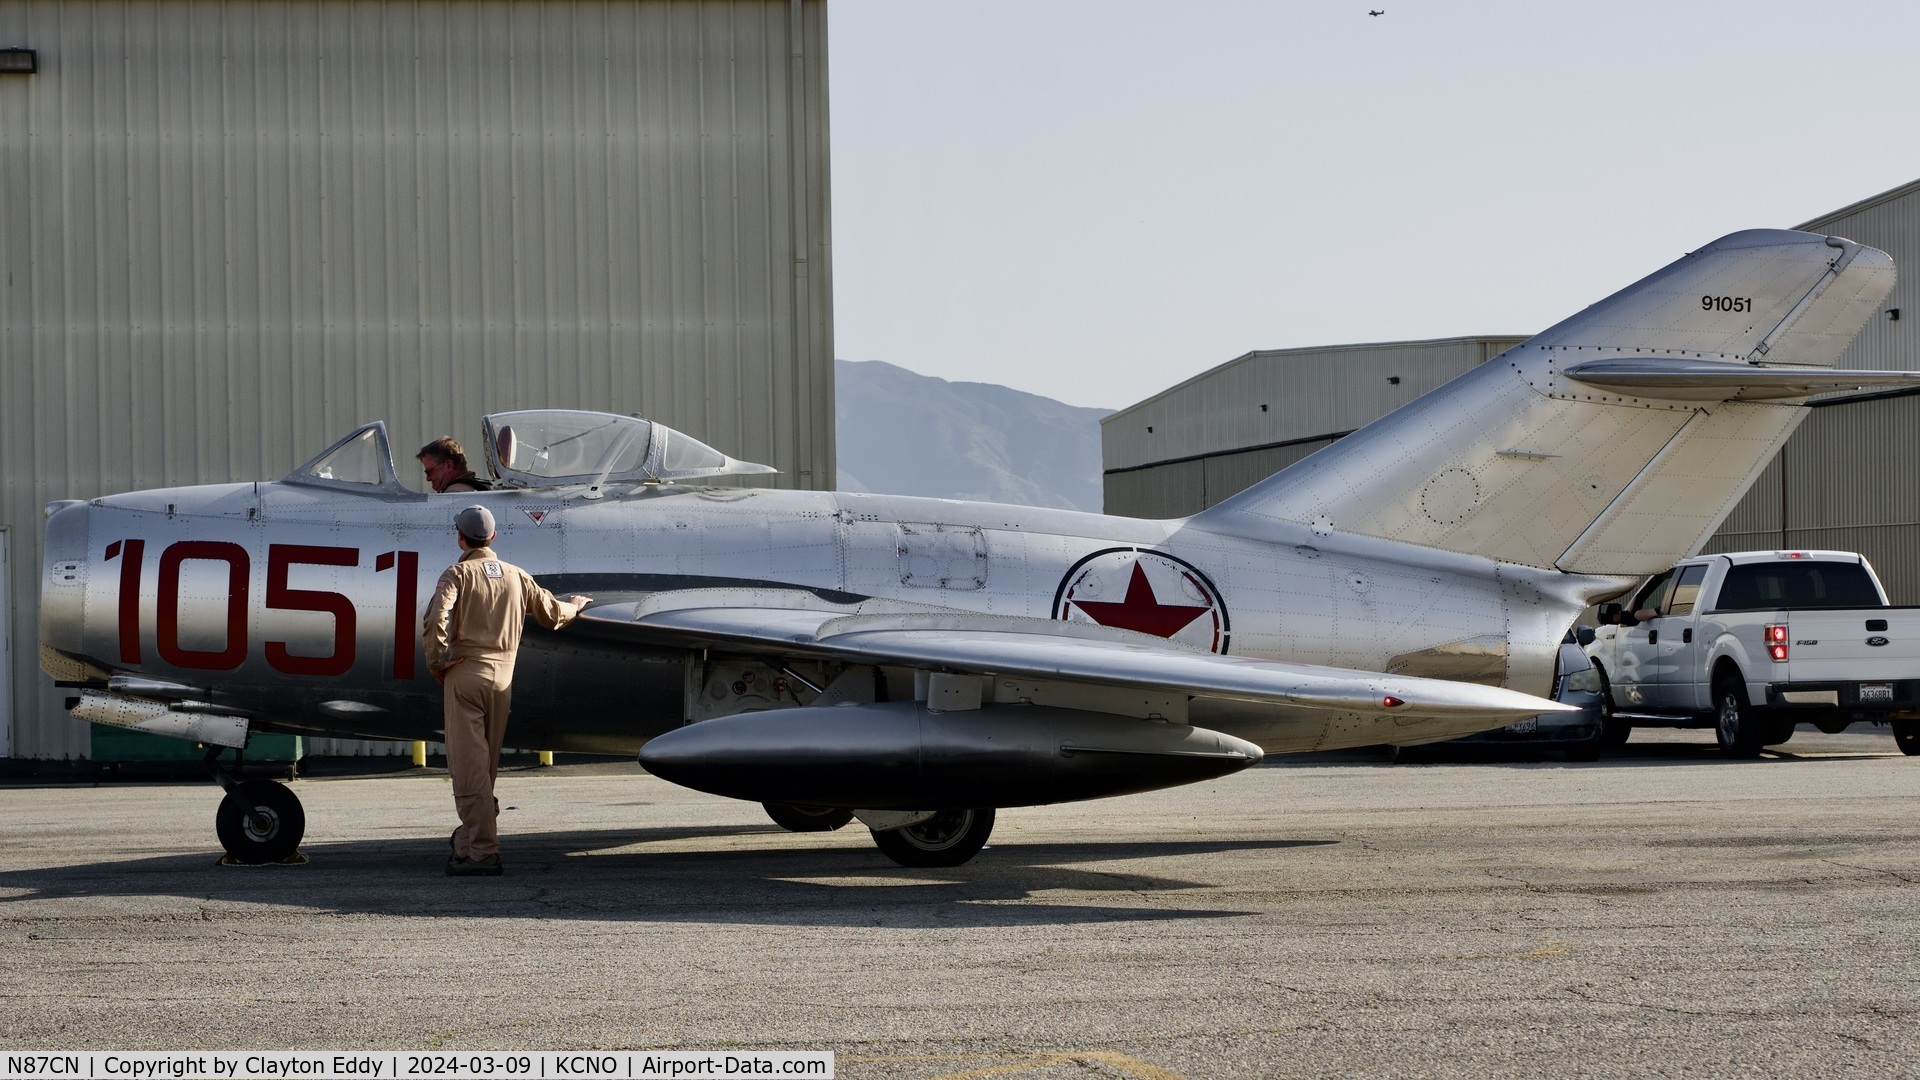 N87CN, Mikoyan-Gurevich MiG-15 C/N 910-51, Planes of Fame Chino airport 2024.